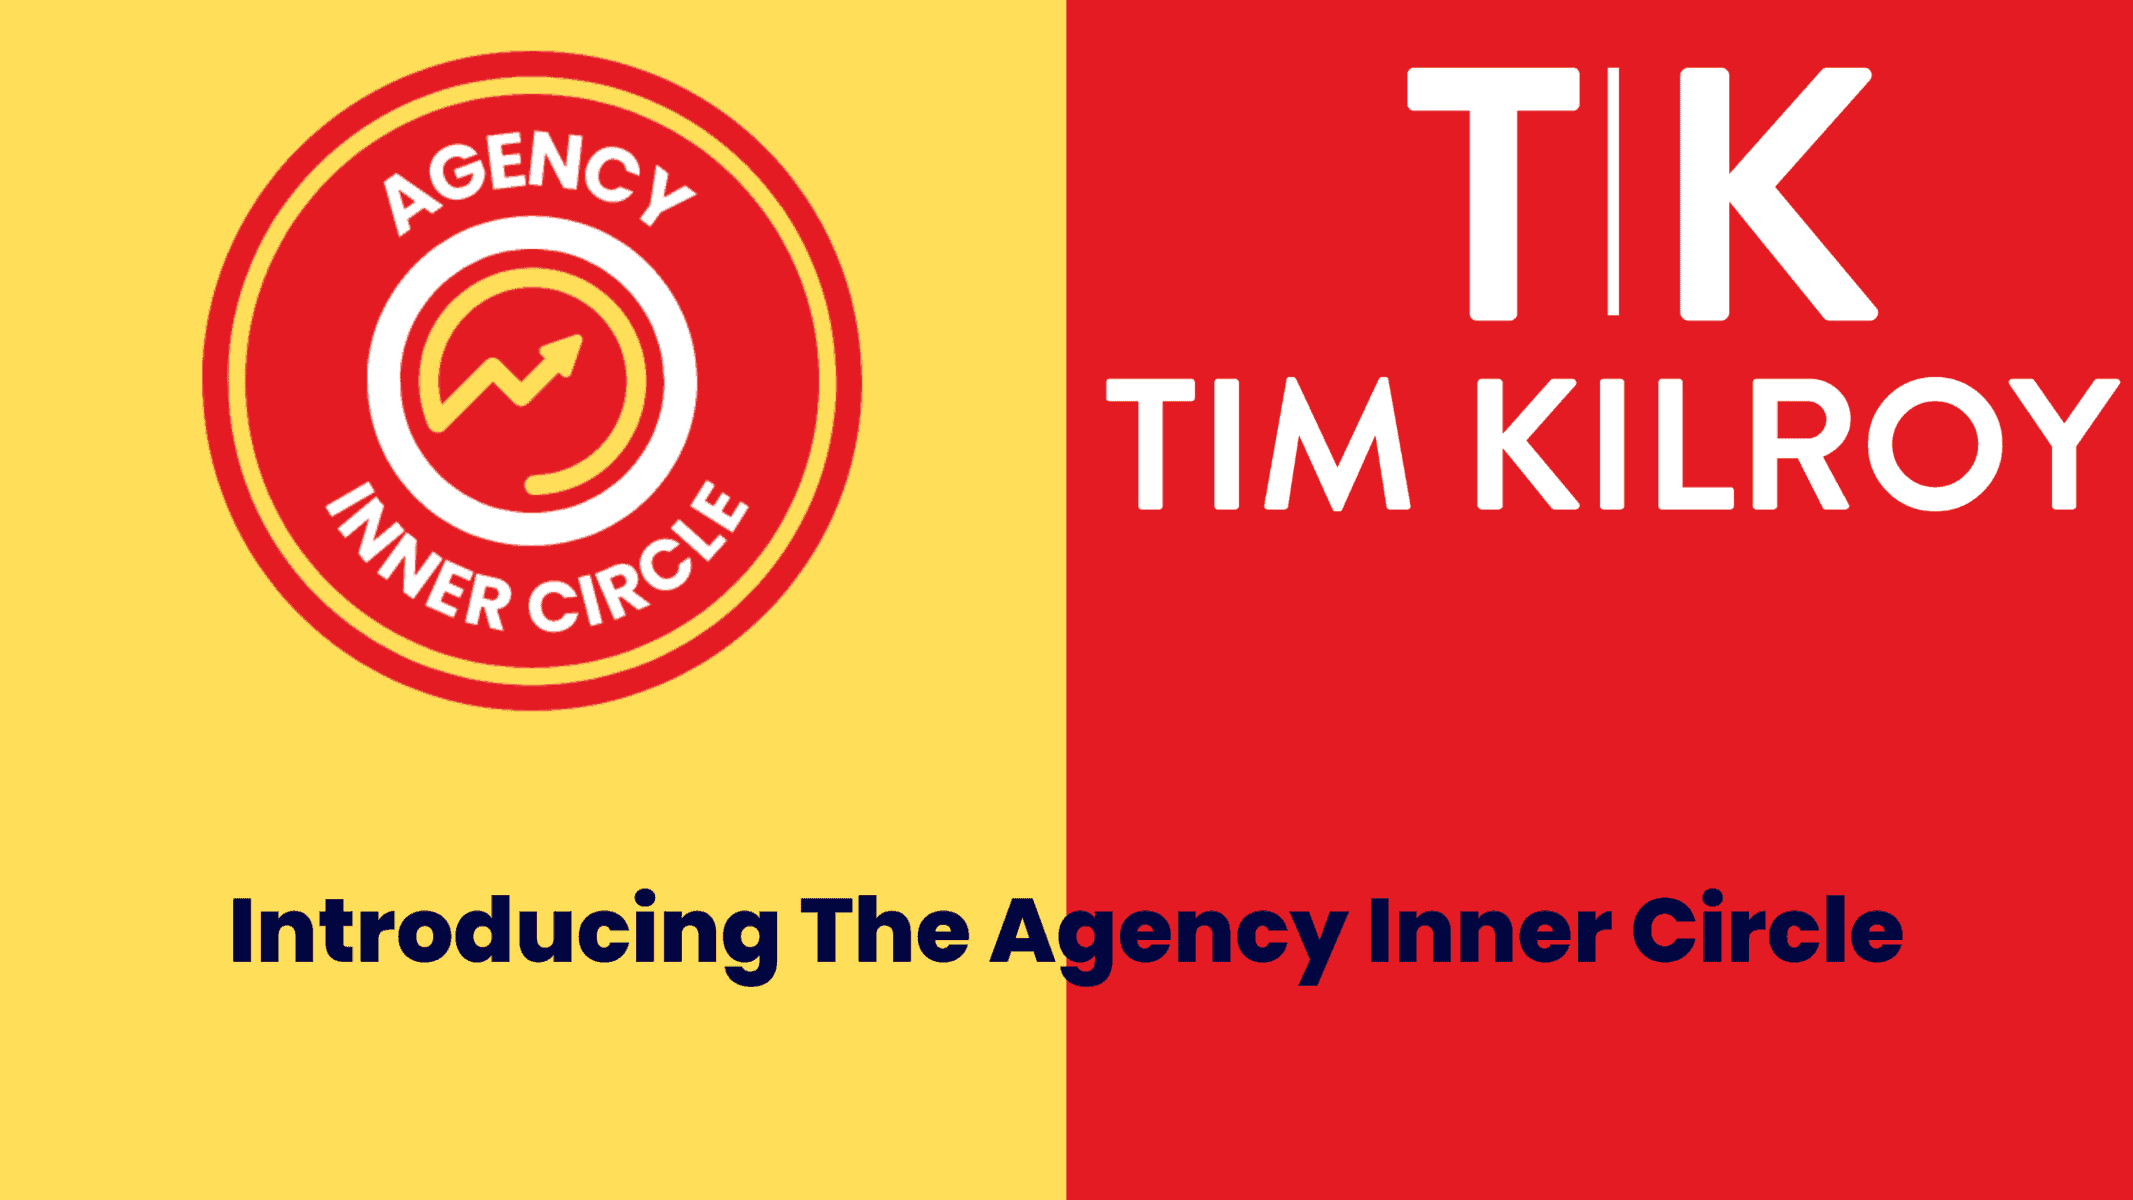 The Agency Inner Circle